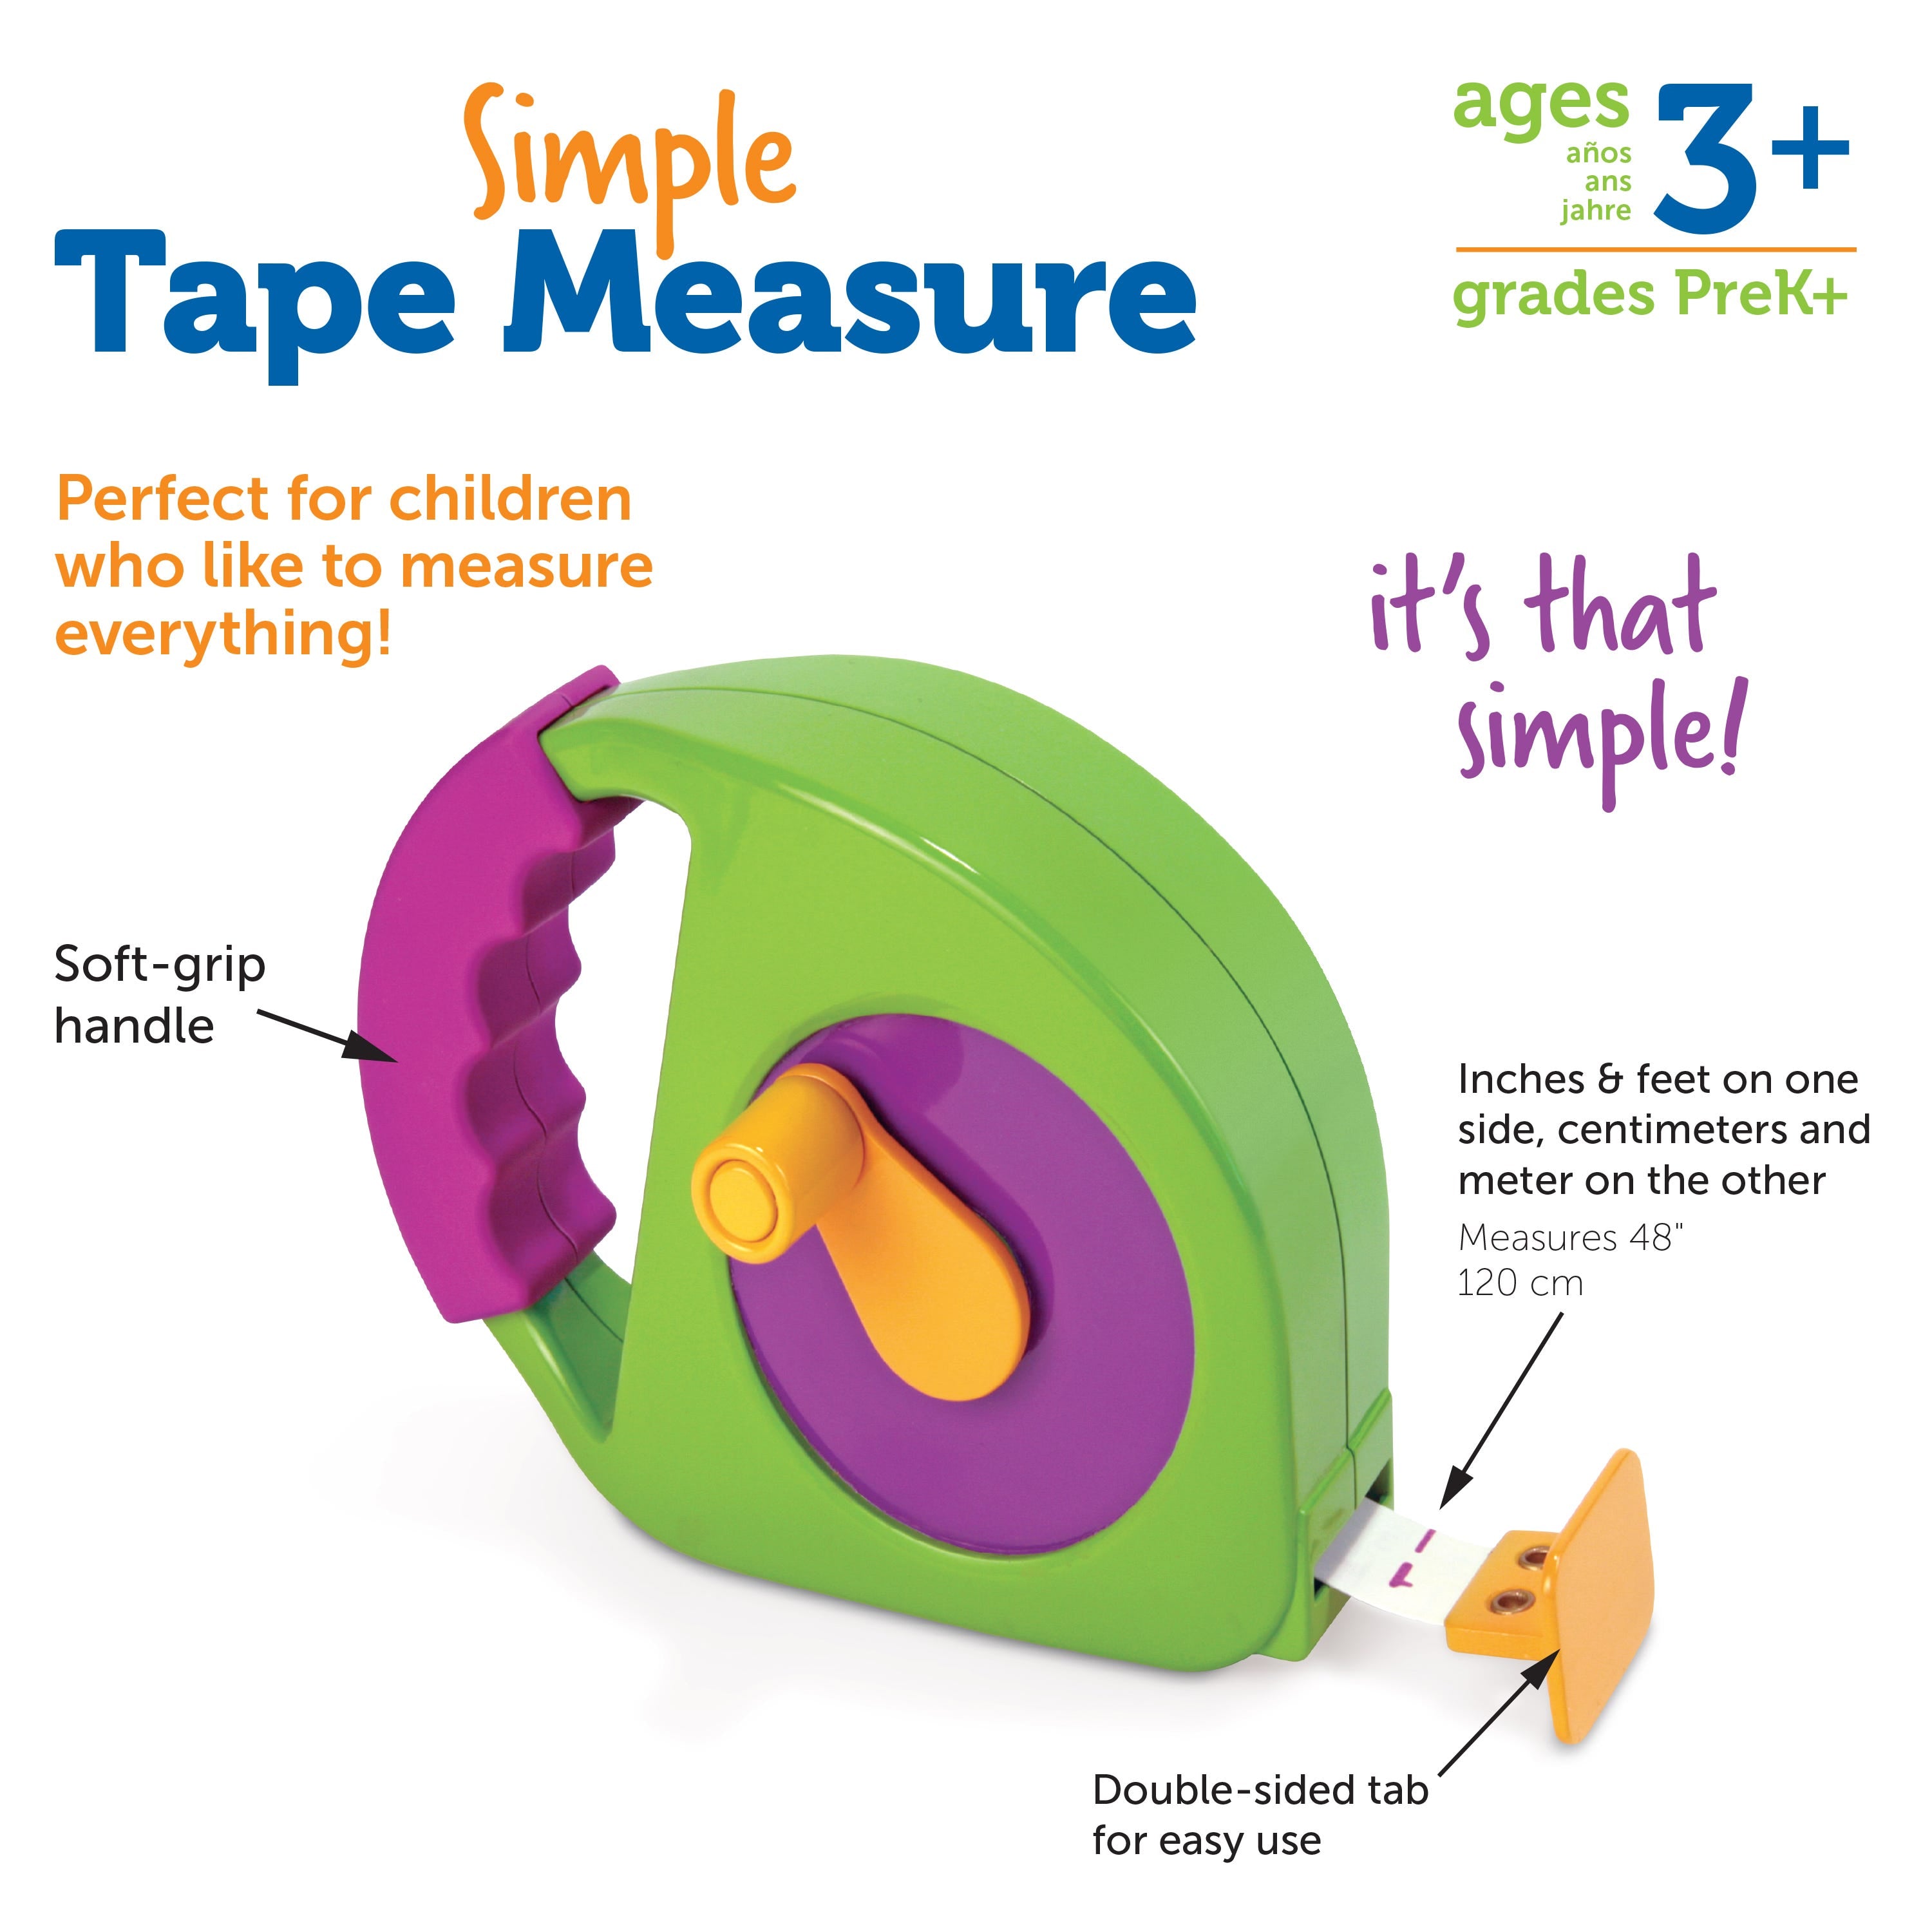 Simple Tape Measure, The Simple Tape Measure is a versatile tool that is perfect for little explorers and doers. Designed with children in mind, this manual-wind tape measure is the perfect size for small hands to operate.With its appealing and contemporary design, this tape measure is sure to capture the attention and imagination of children. The simplified features make it easy for them to understand and use. On one side of the tape, they will find inches and feet markings, while on the other side, there 